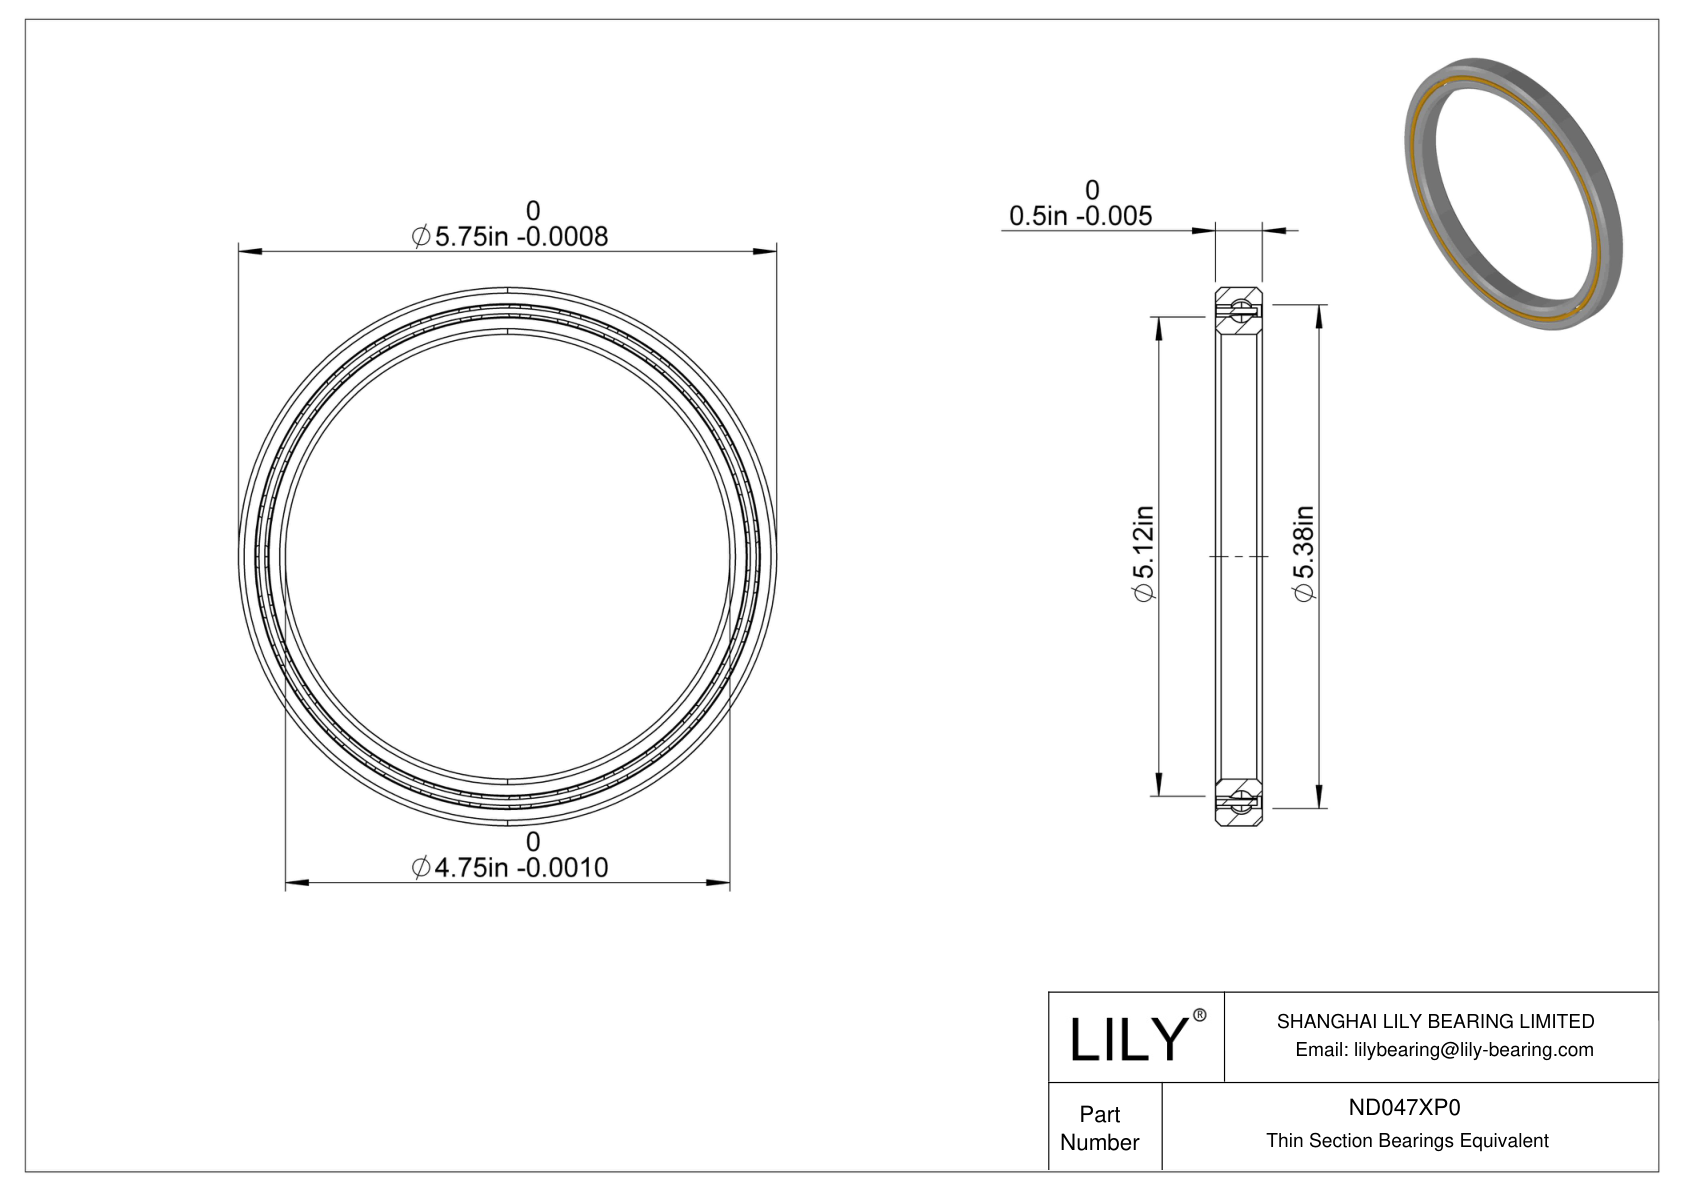 ND047XP0 Constant Section (CS) Bearings cad drawing